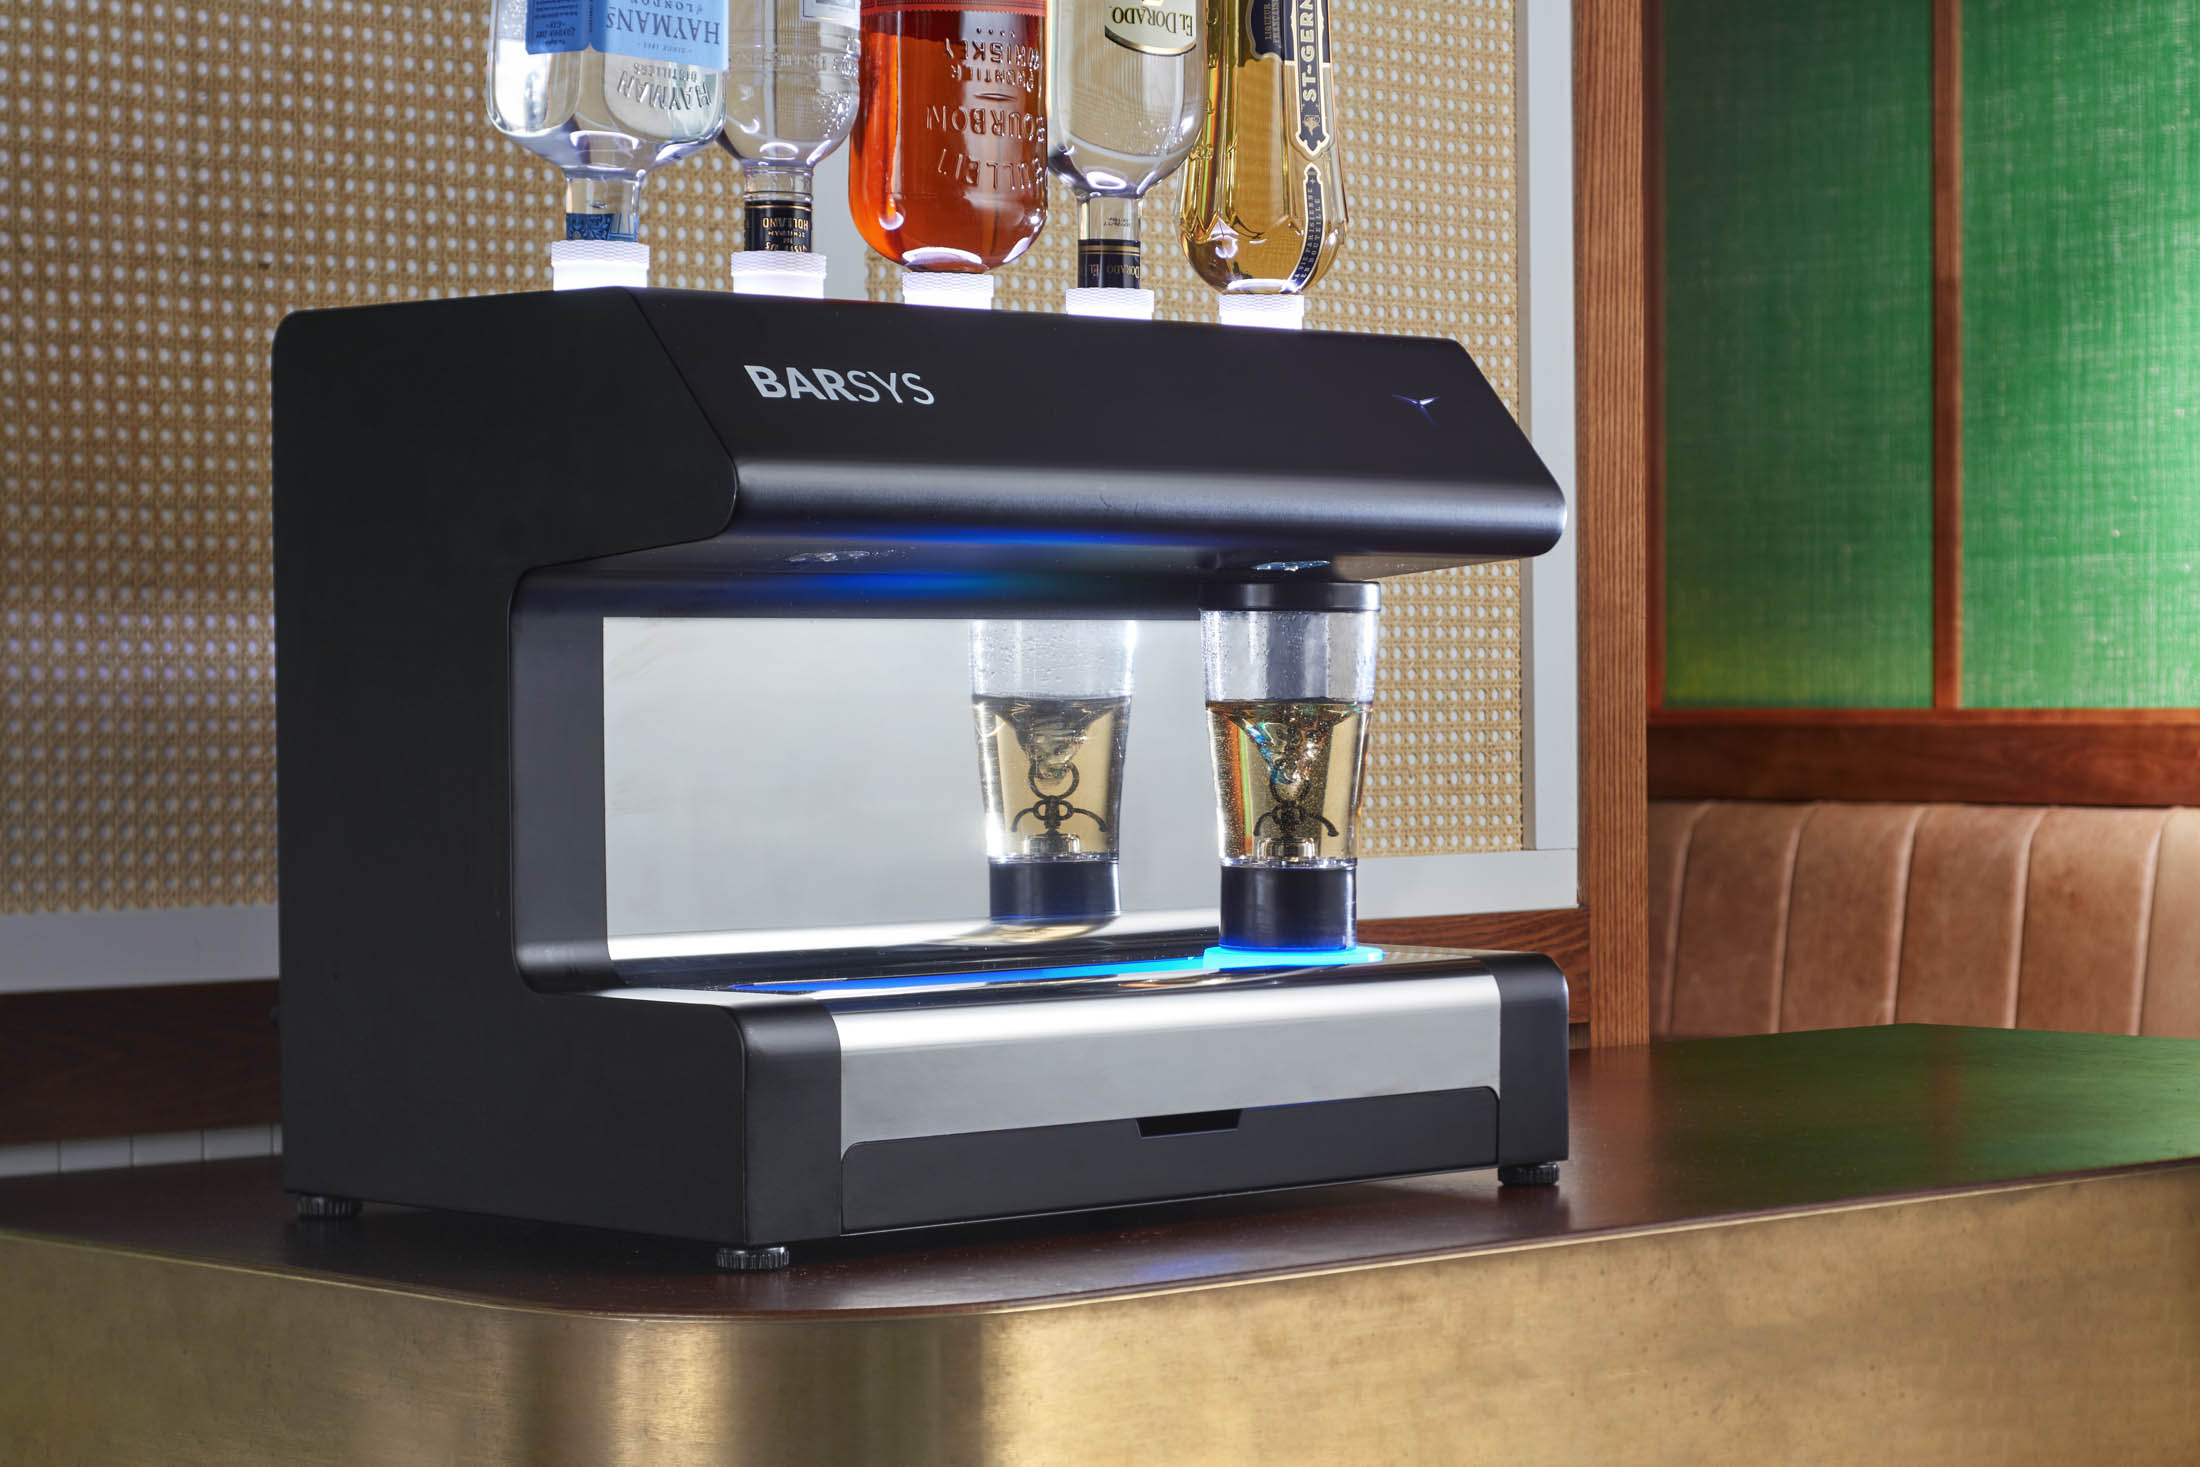 Barsys Automated Cocktail Maker review: A messy cocktail maker that pours  disappointing drinks - CNET